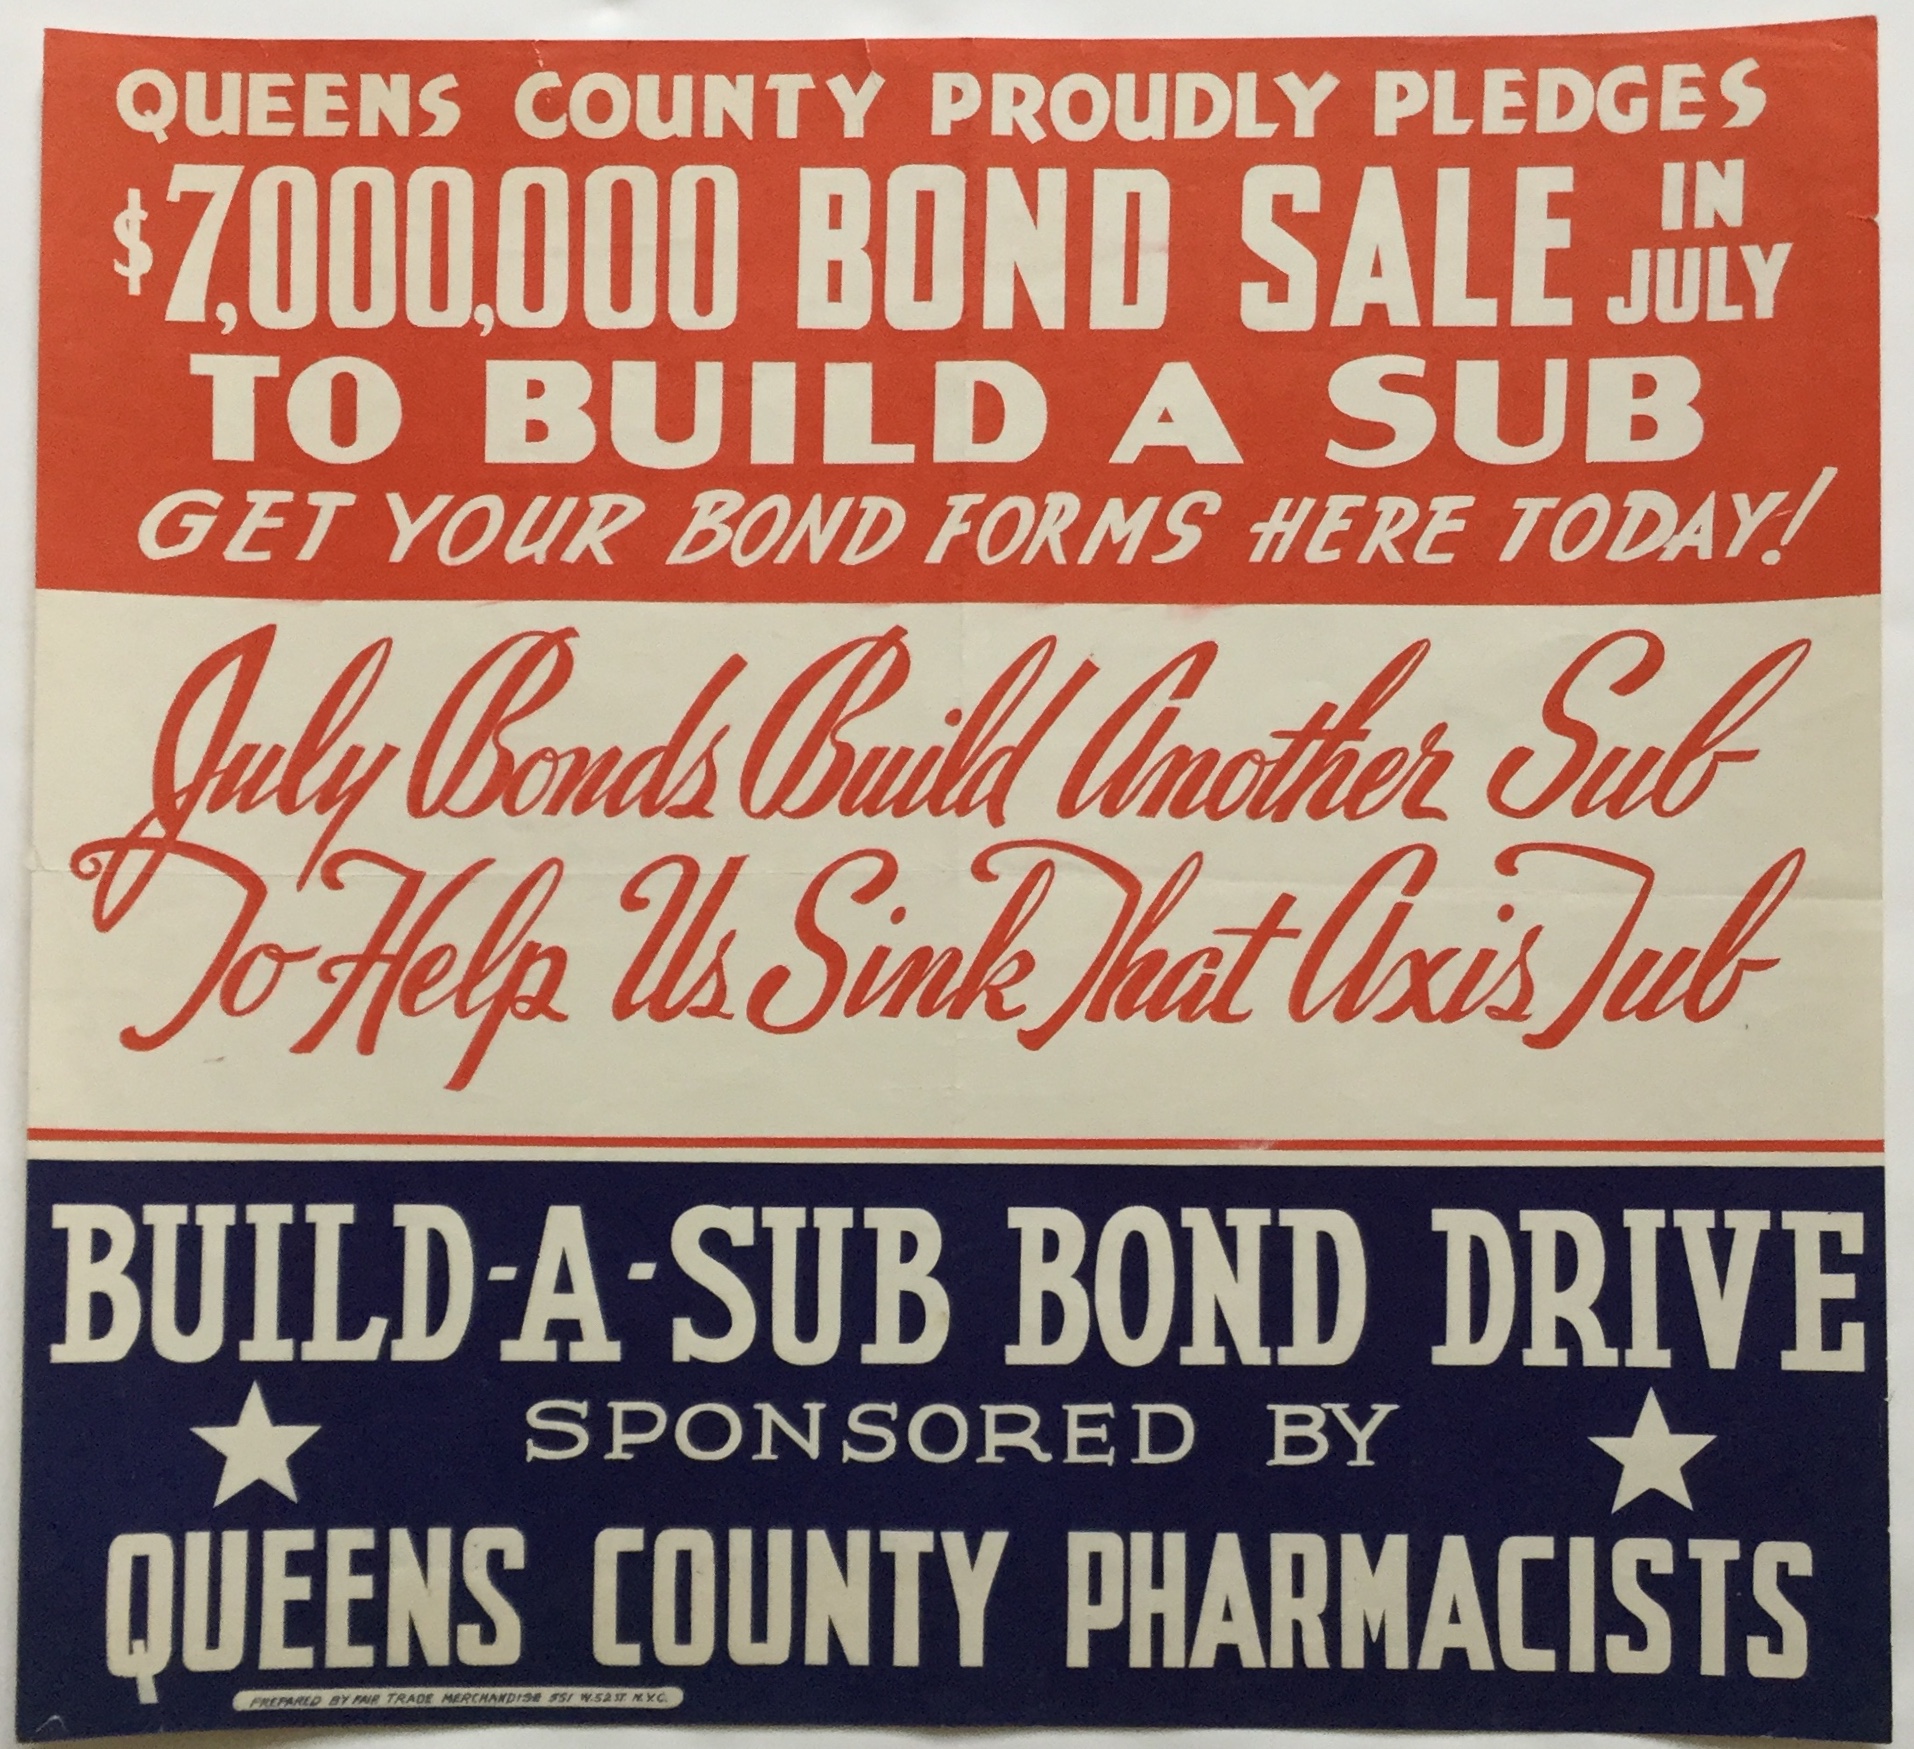 L0267		BUILD-A-SUB BOND DRIVE SPONSORED BY QUEENS COUNTY PHARMACISTS